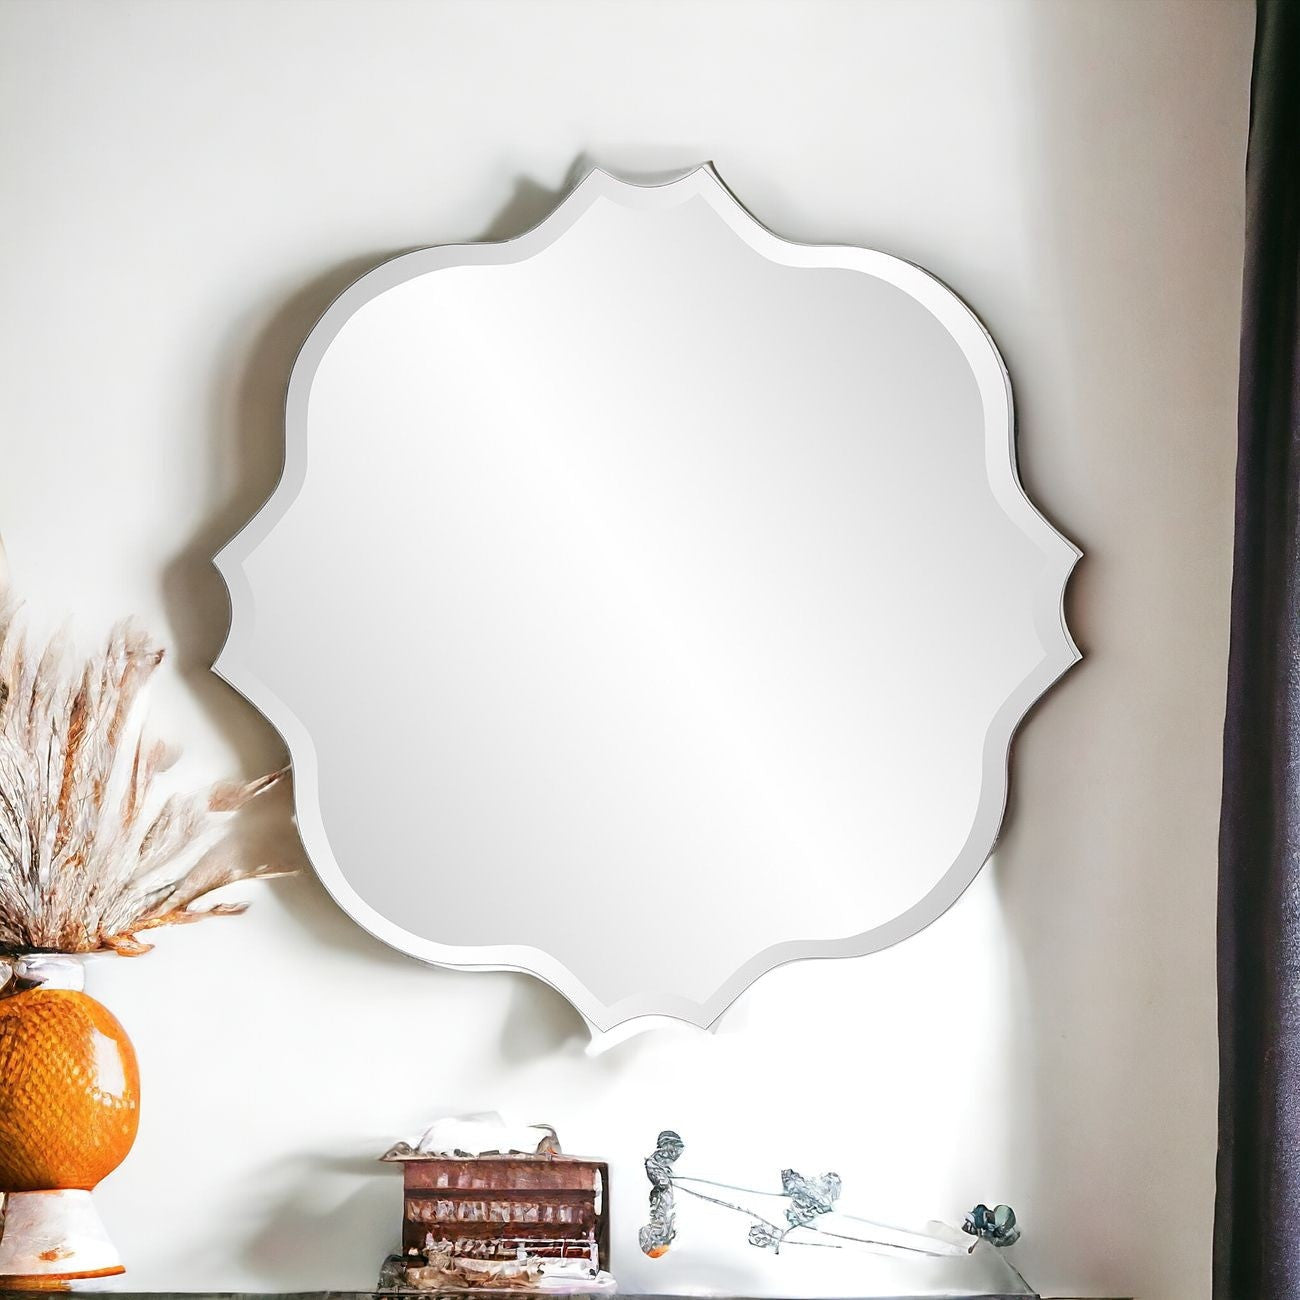 36" Mirror Square Framed Accent Mirror